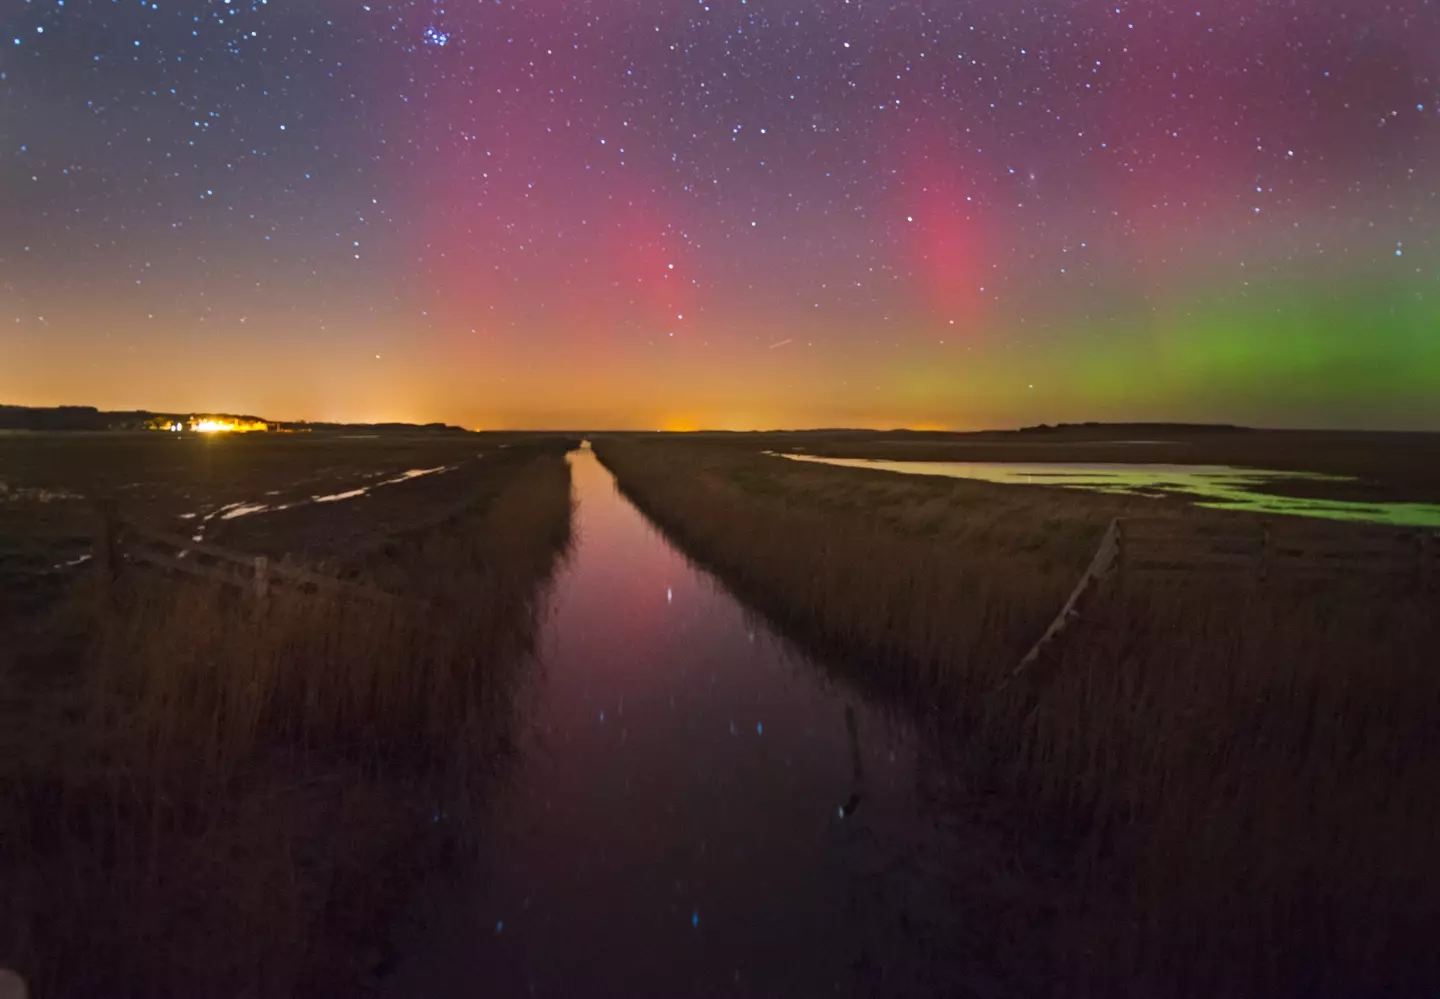 Last weekend the Northern Lights could be seen right across the UK, including here in Norfolk. (David Tipling/Universal Images Group via Getty Images)